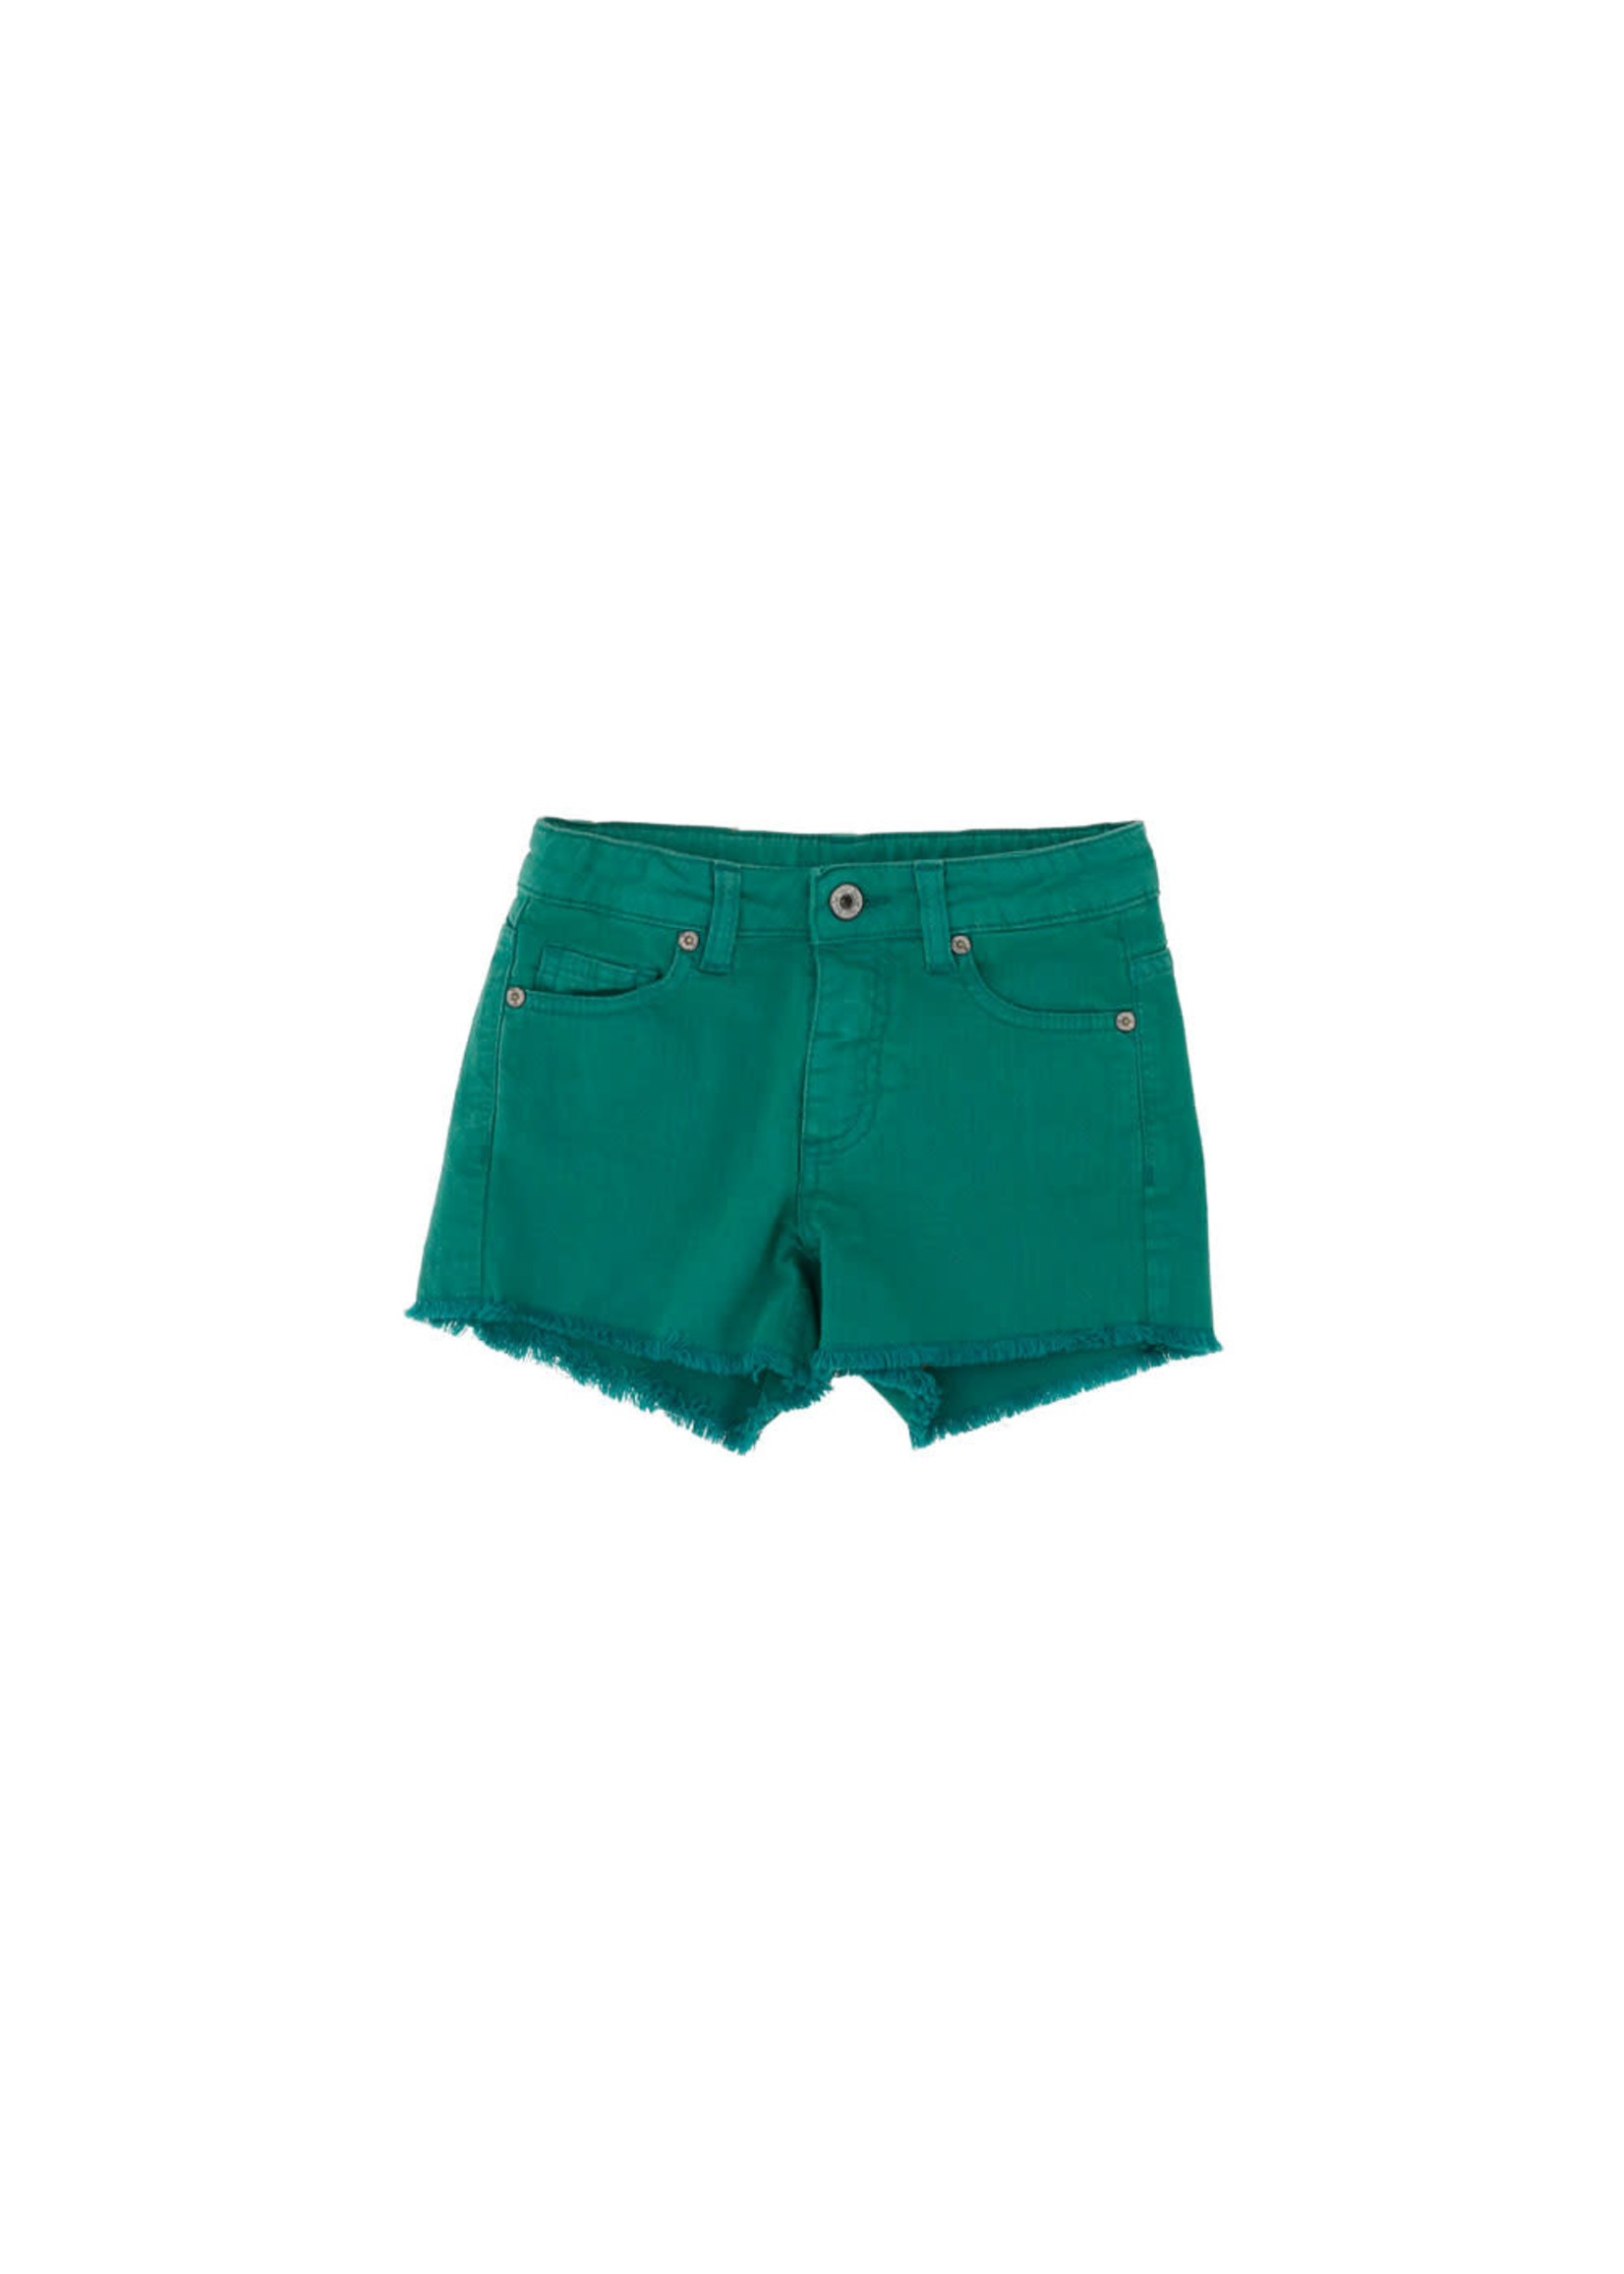 Dixie Dixie jeans short green - RB58F00